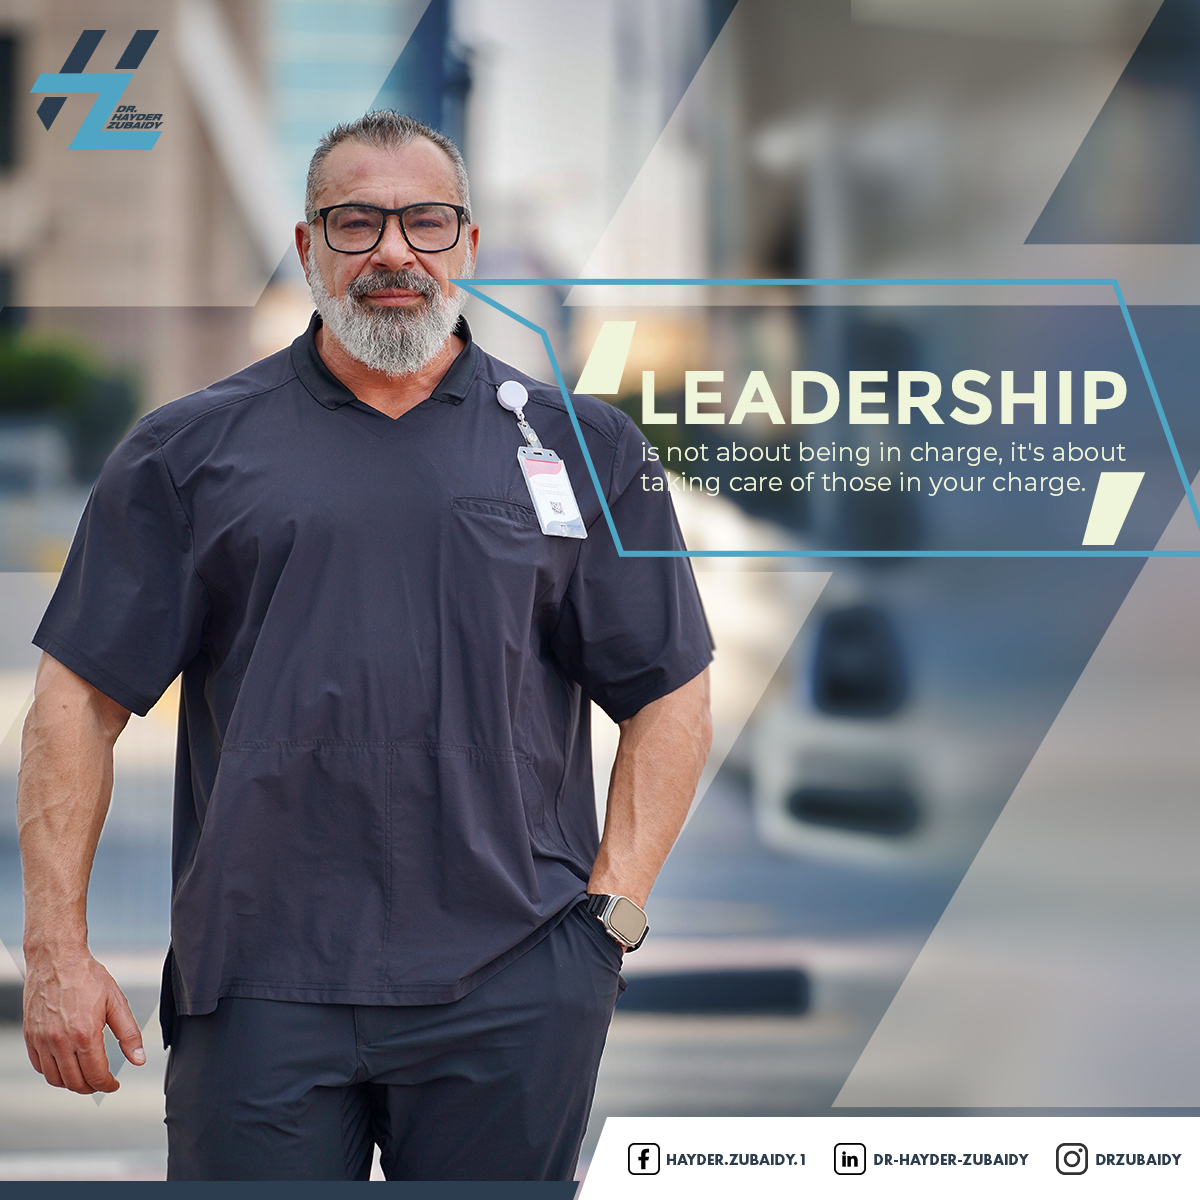 A leader's role is not to dictate but to facilitate! I personally believe that it's your job as a leader to create an environment where everyone can find support to overcome their challenges.

#HealthcareManagement #RCMOutsourcing #PatientFinancing #HealthcareTrends